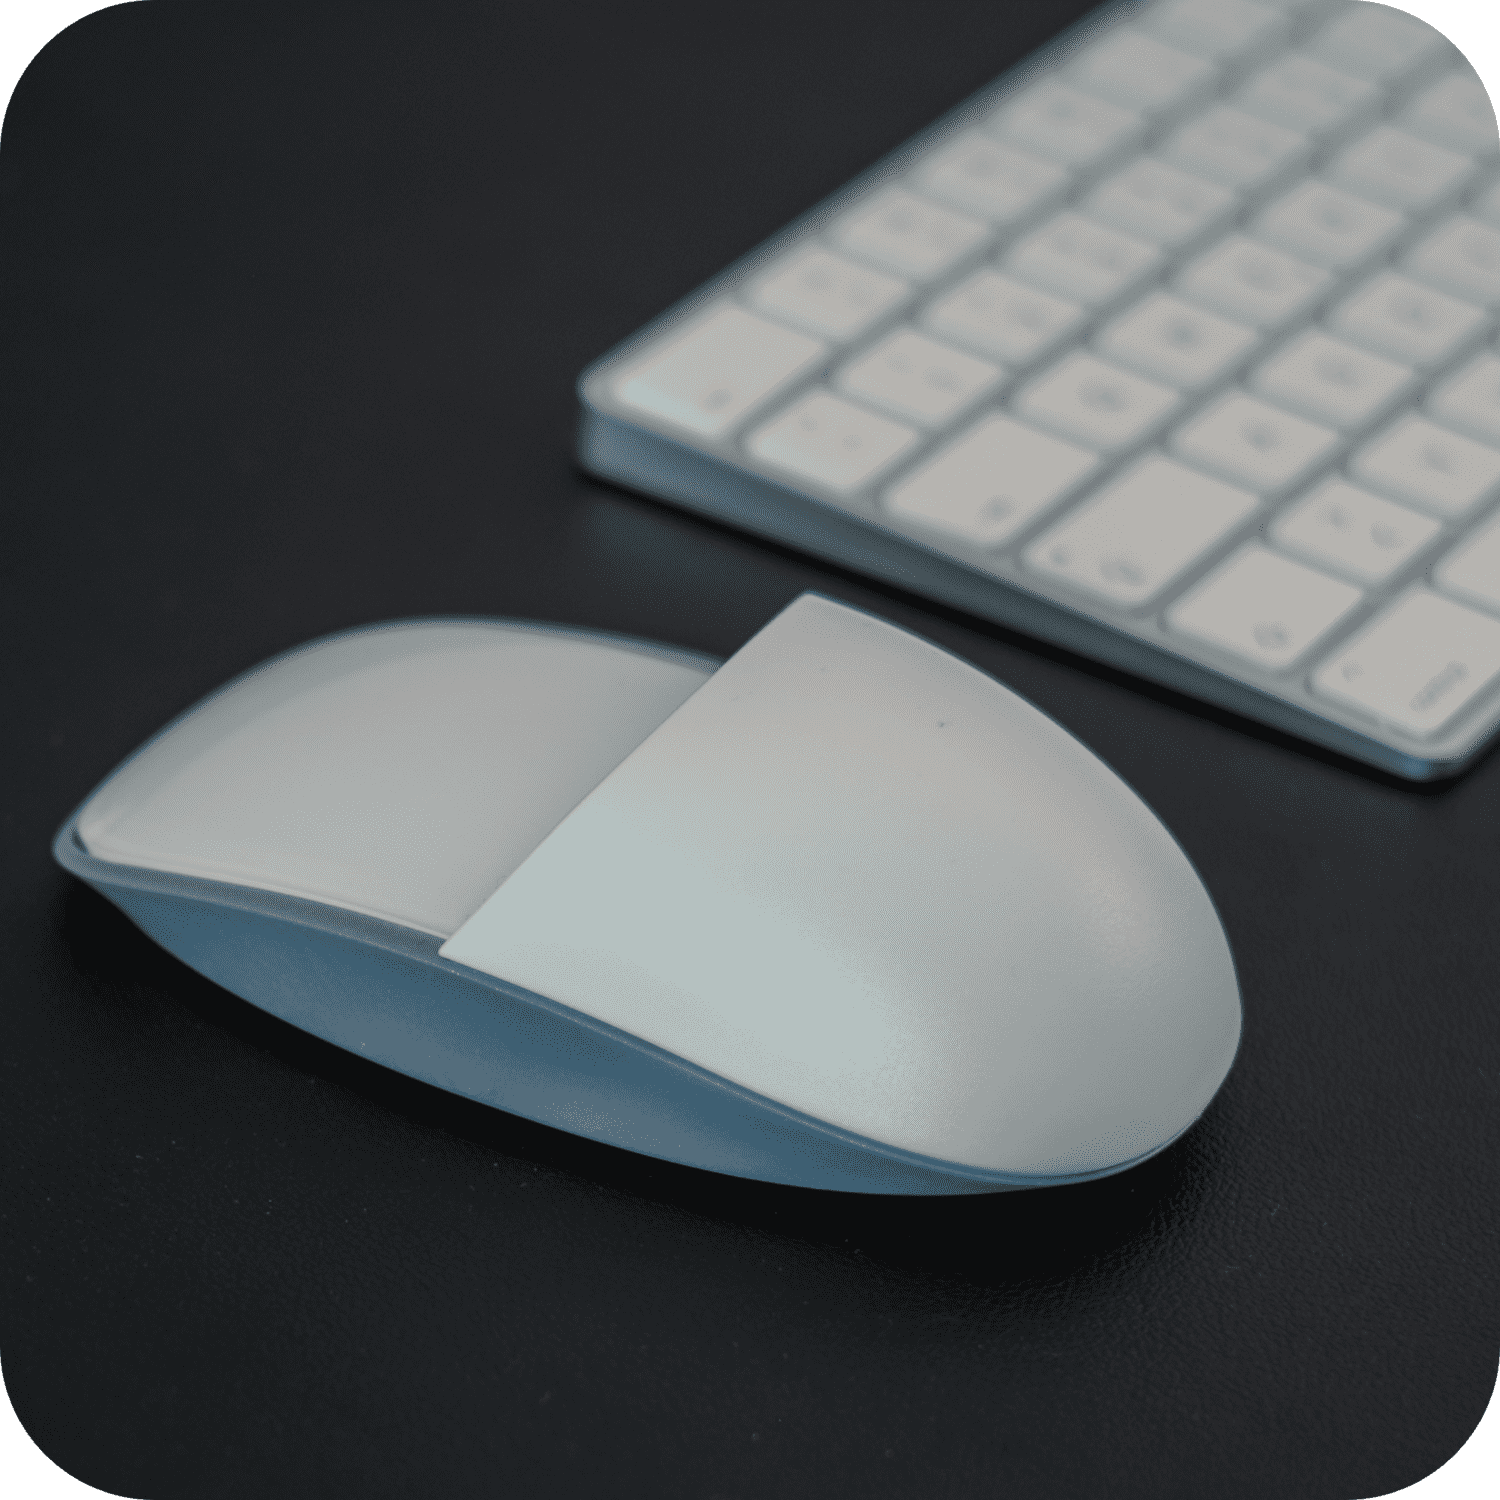 Solumics.Case - The ergonomic upgrade for your iMac Mouse